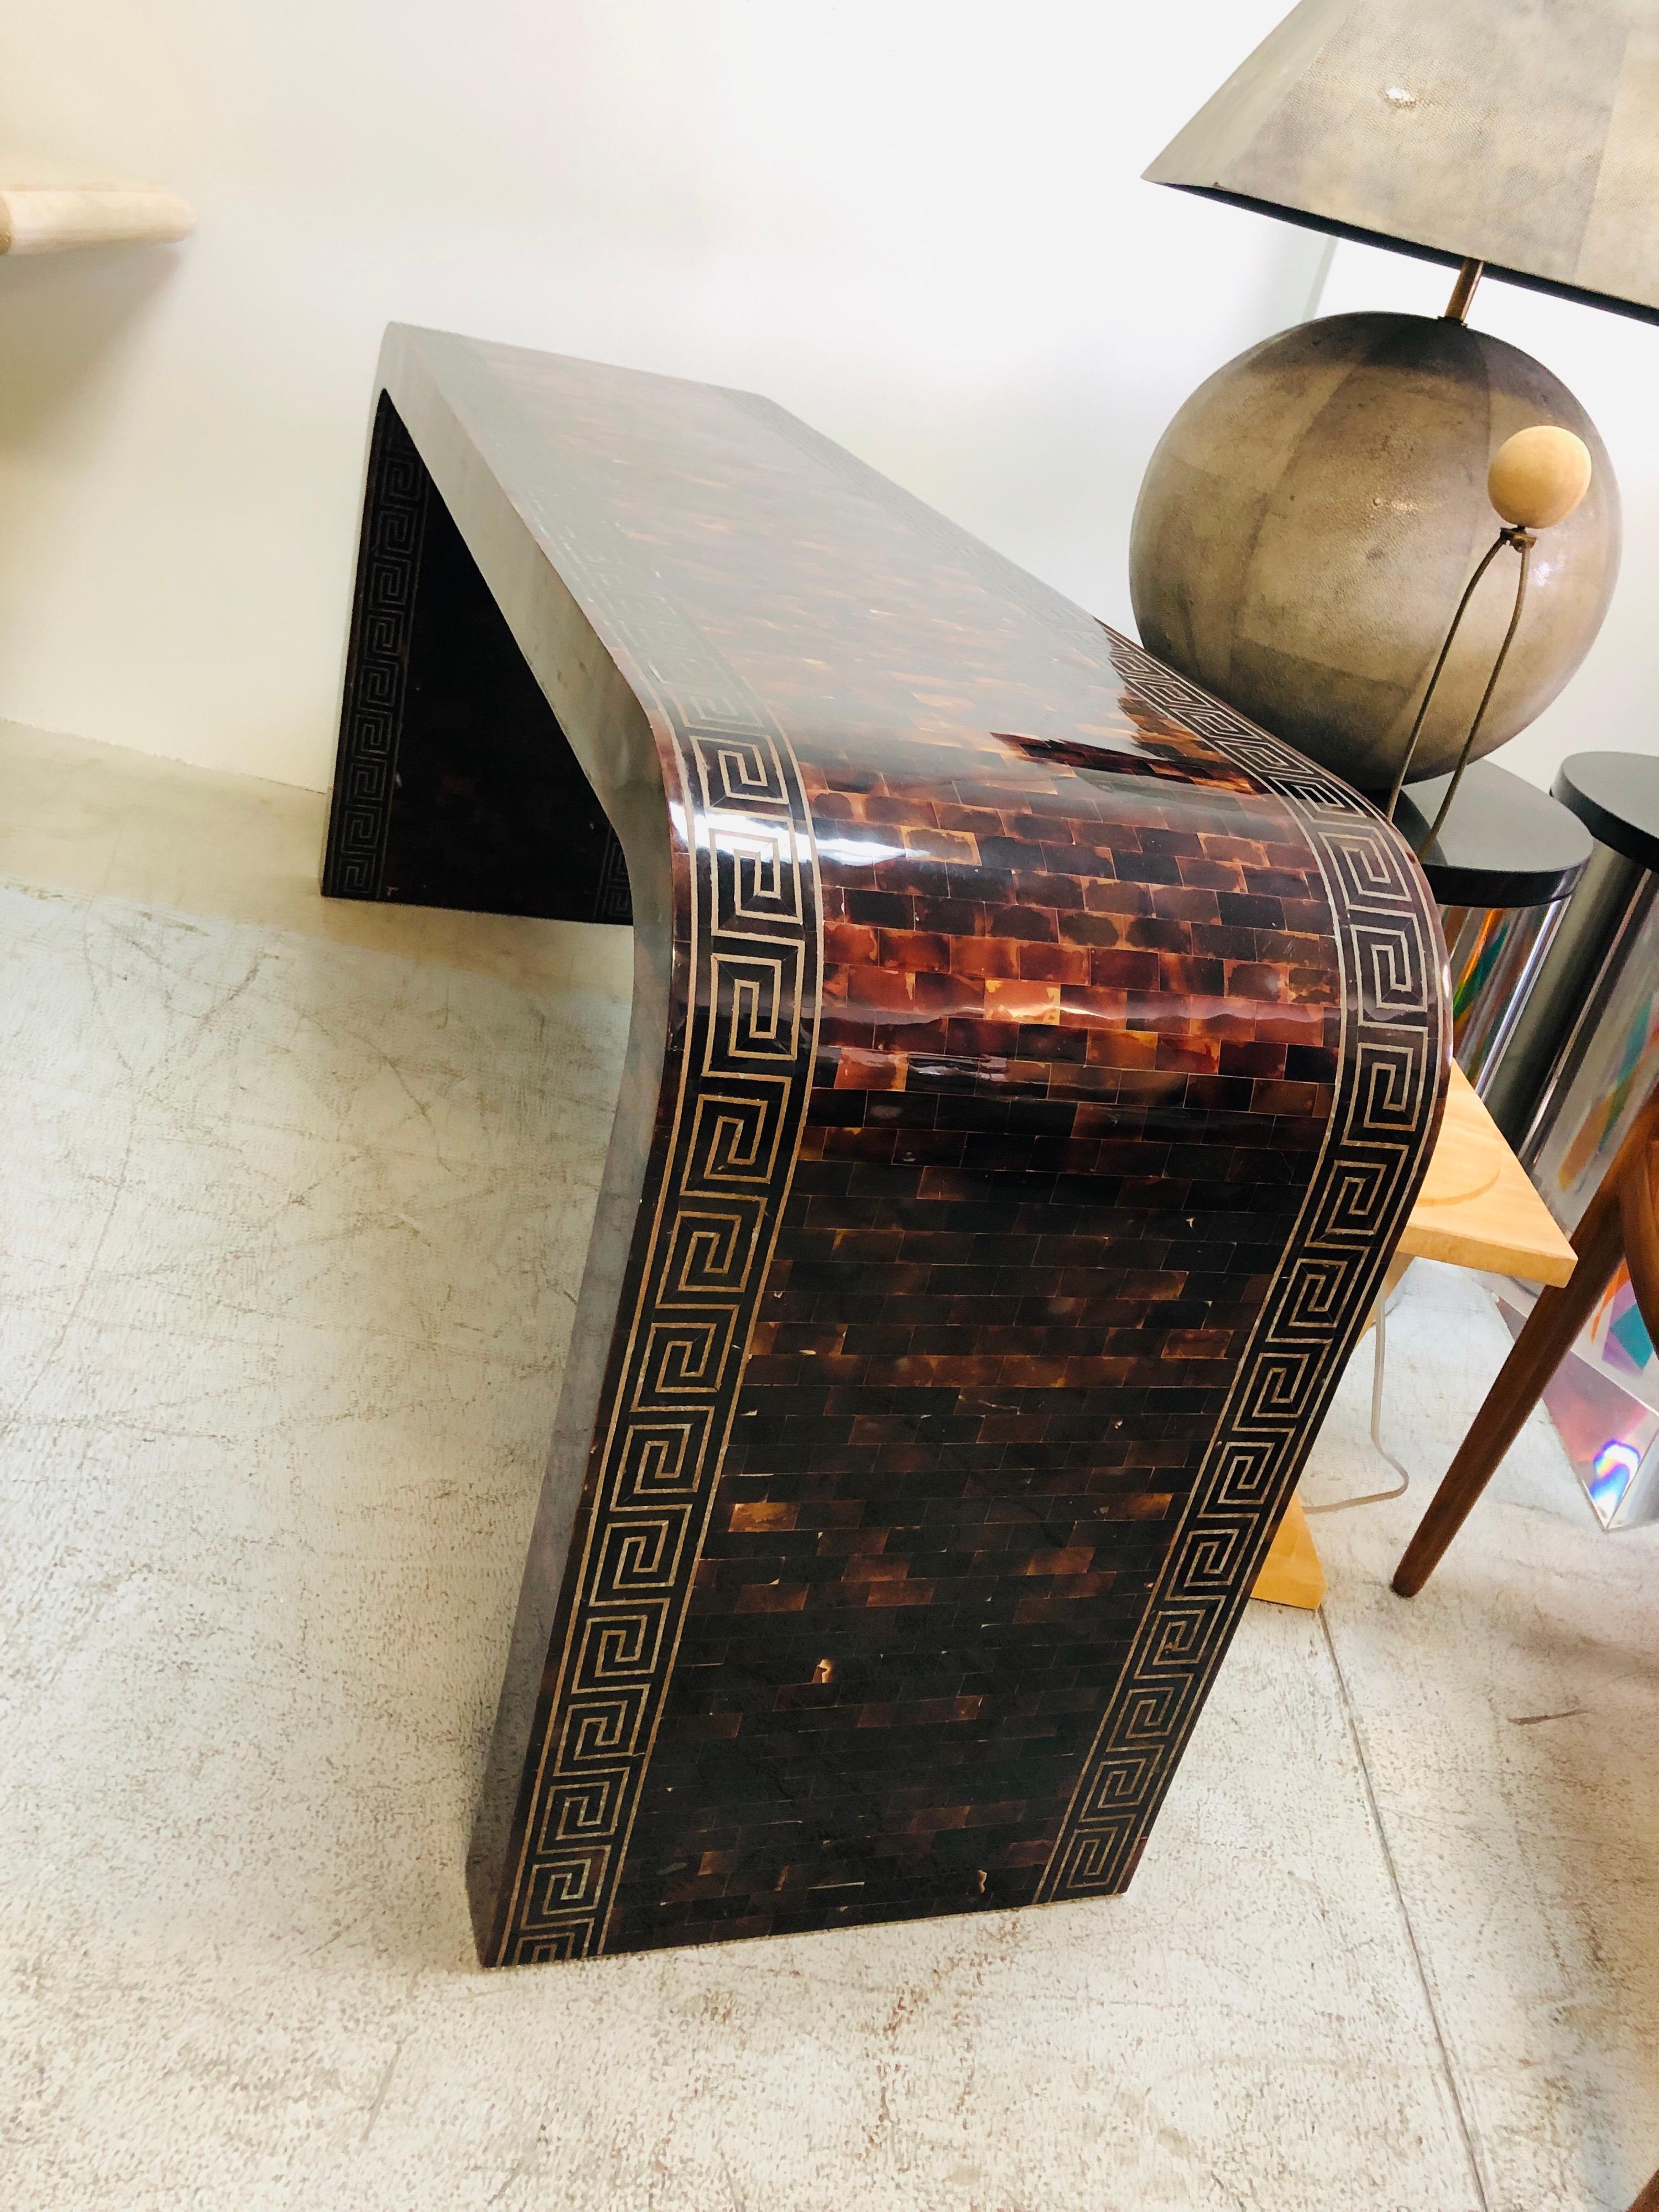 A waterfall console table. Tessellated pieces with crisp inlaid brass design. The Greek key design is very detailed and in present even on the inside of the bases. Beautiful original condition. 25% off sale